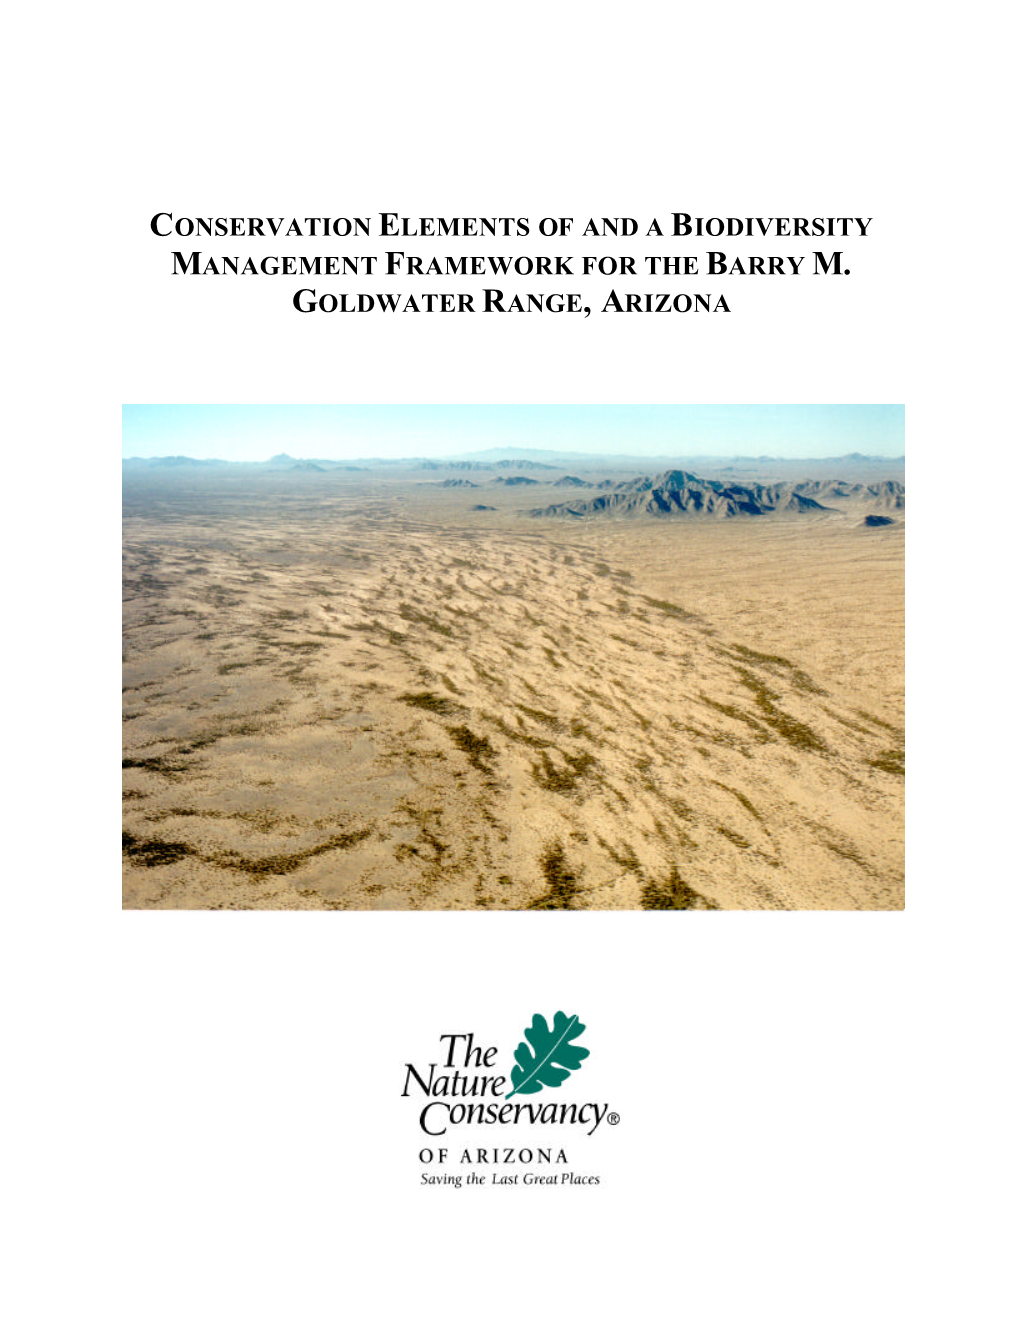 Conservation Elements of and a Biodiversity Management Framework for the Barry M